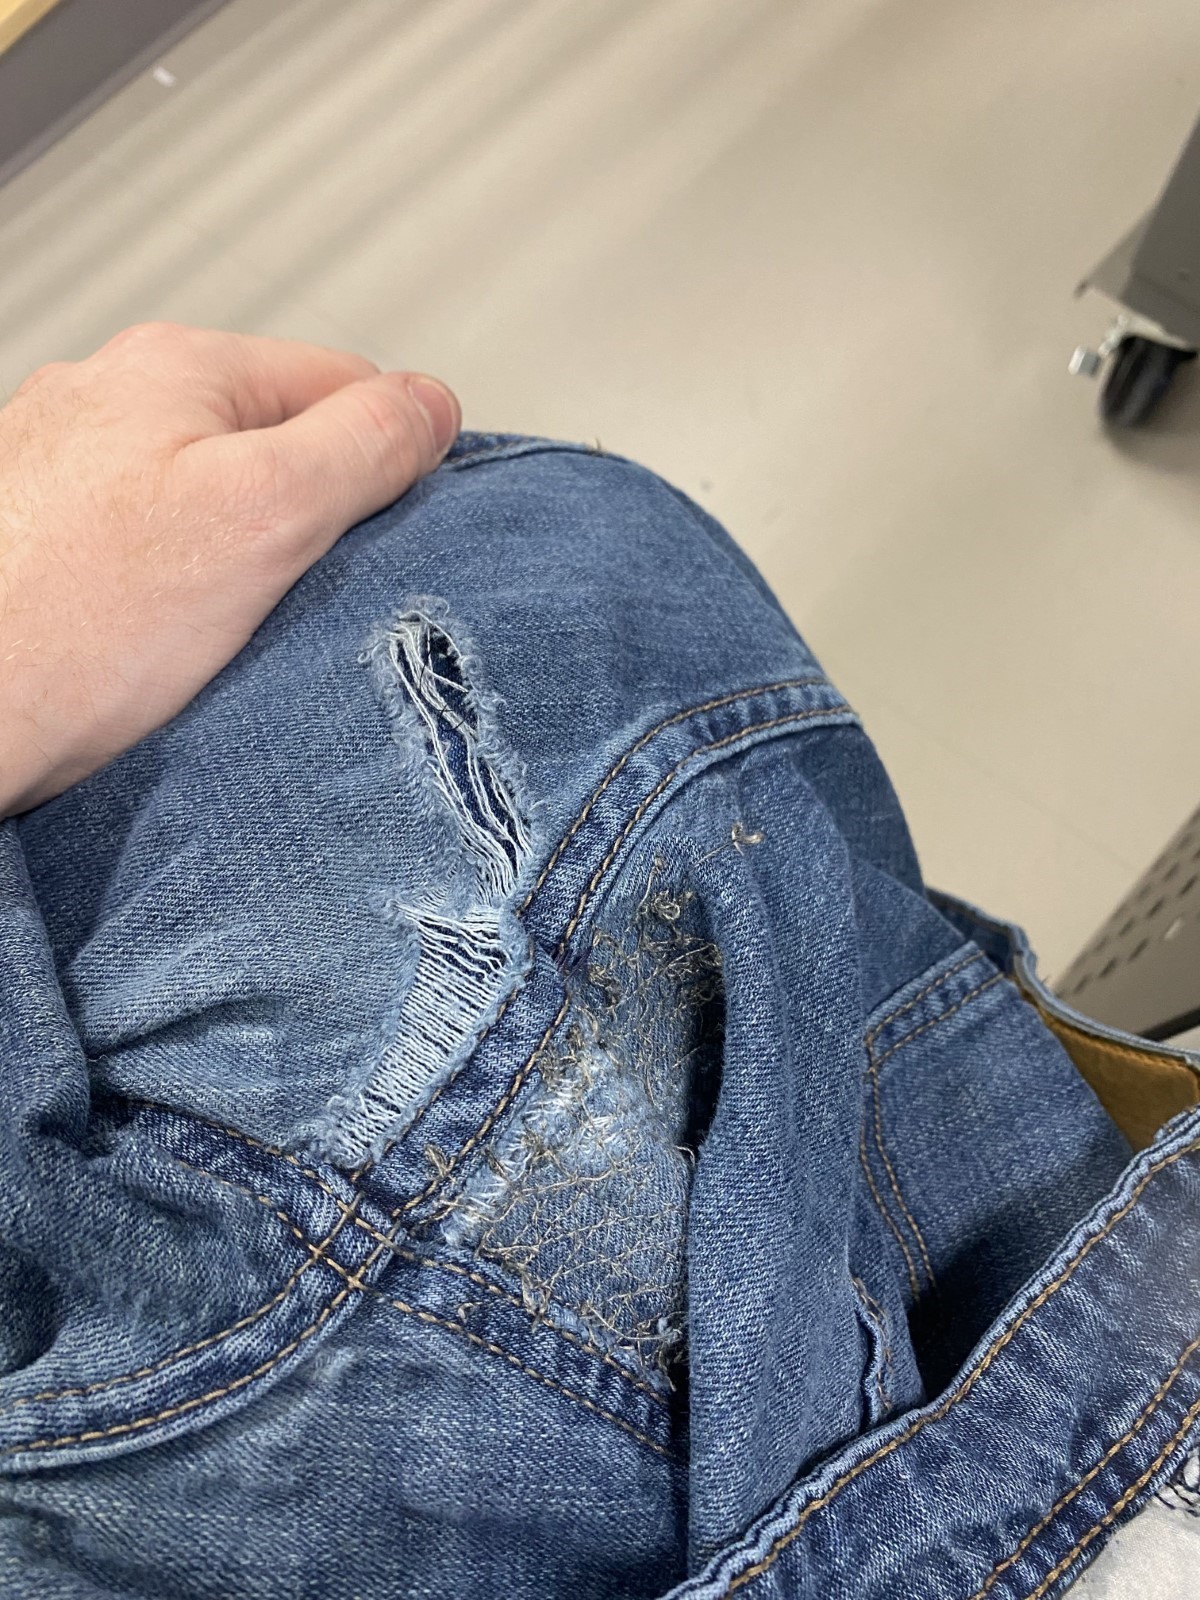 Close up of worn out crotch seams of denim jeans